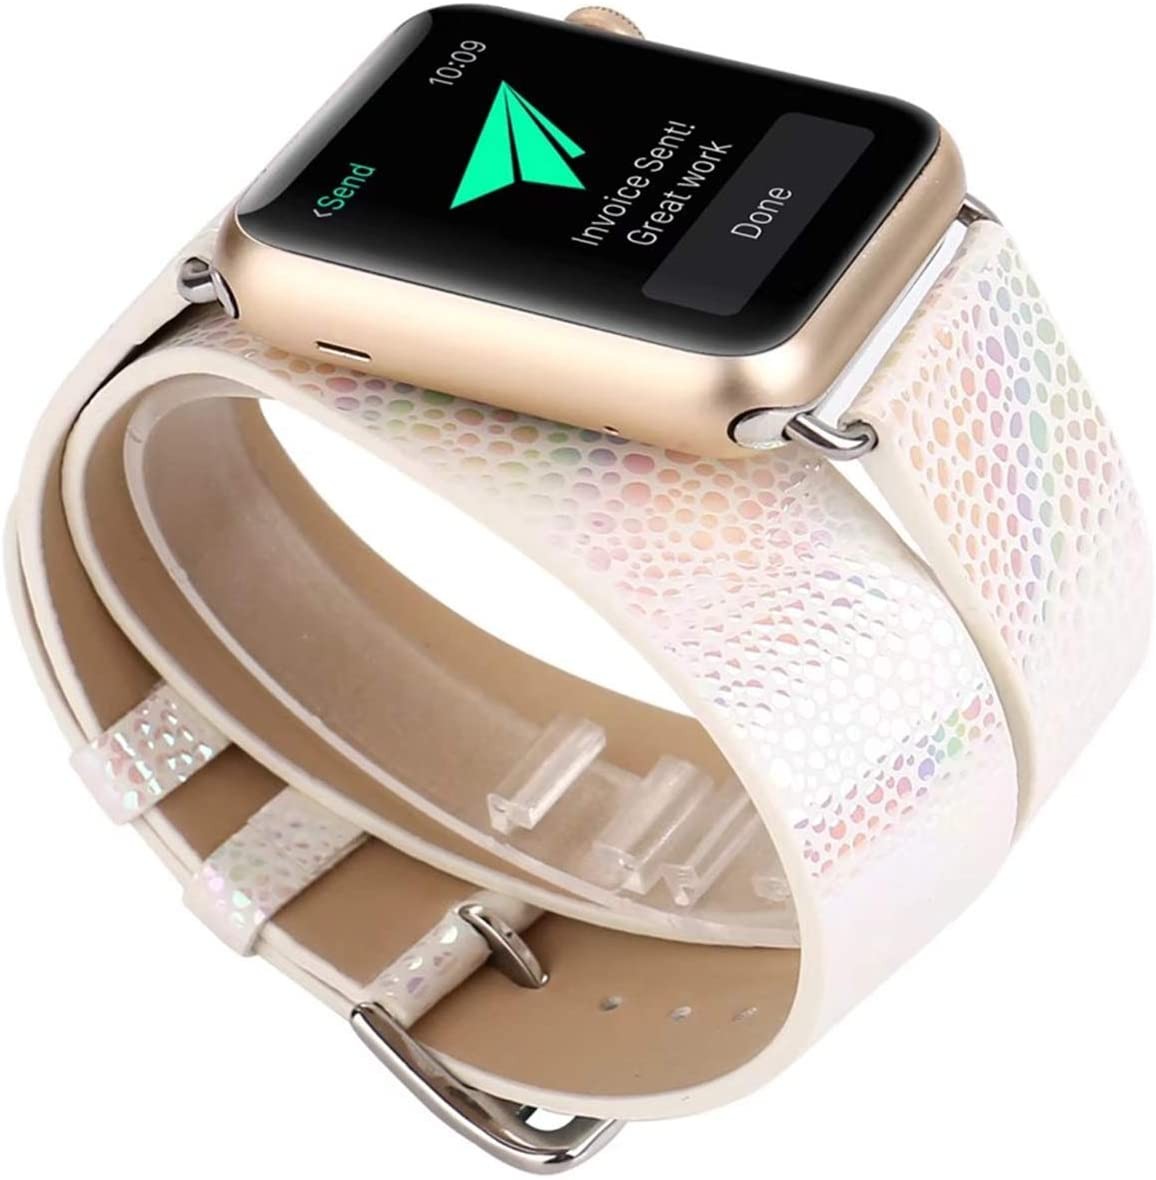 Apple Watch Band 42mm 44mm, [Holographic Rainbow Colorful Laser Dots] Double Tour Watch Strap